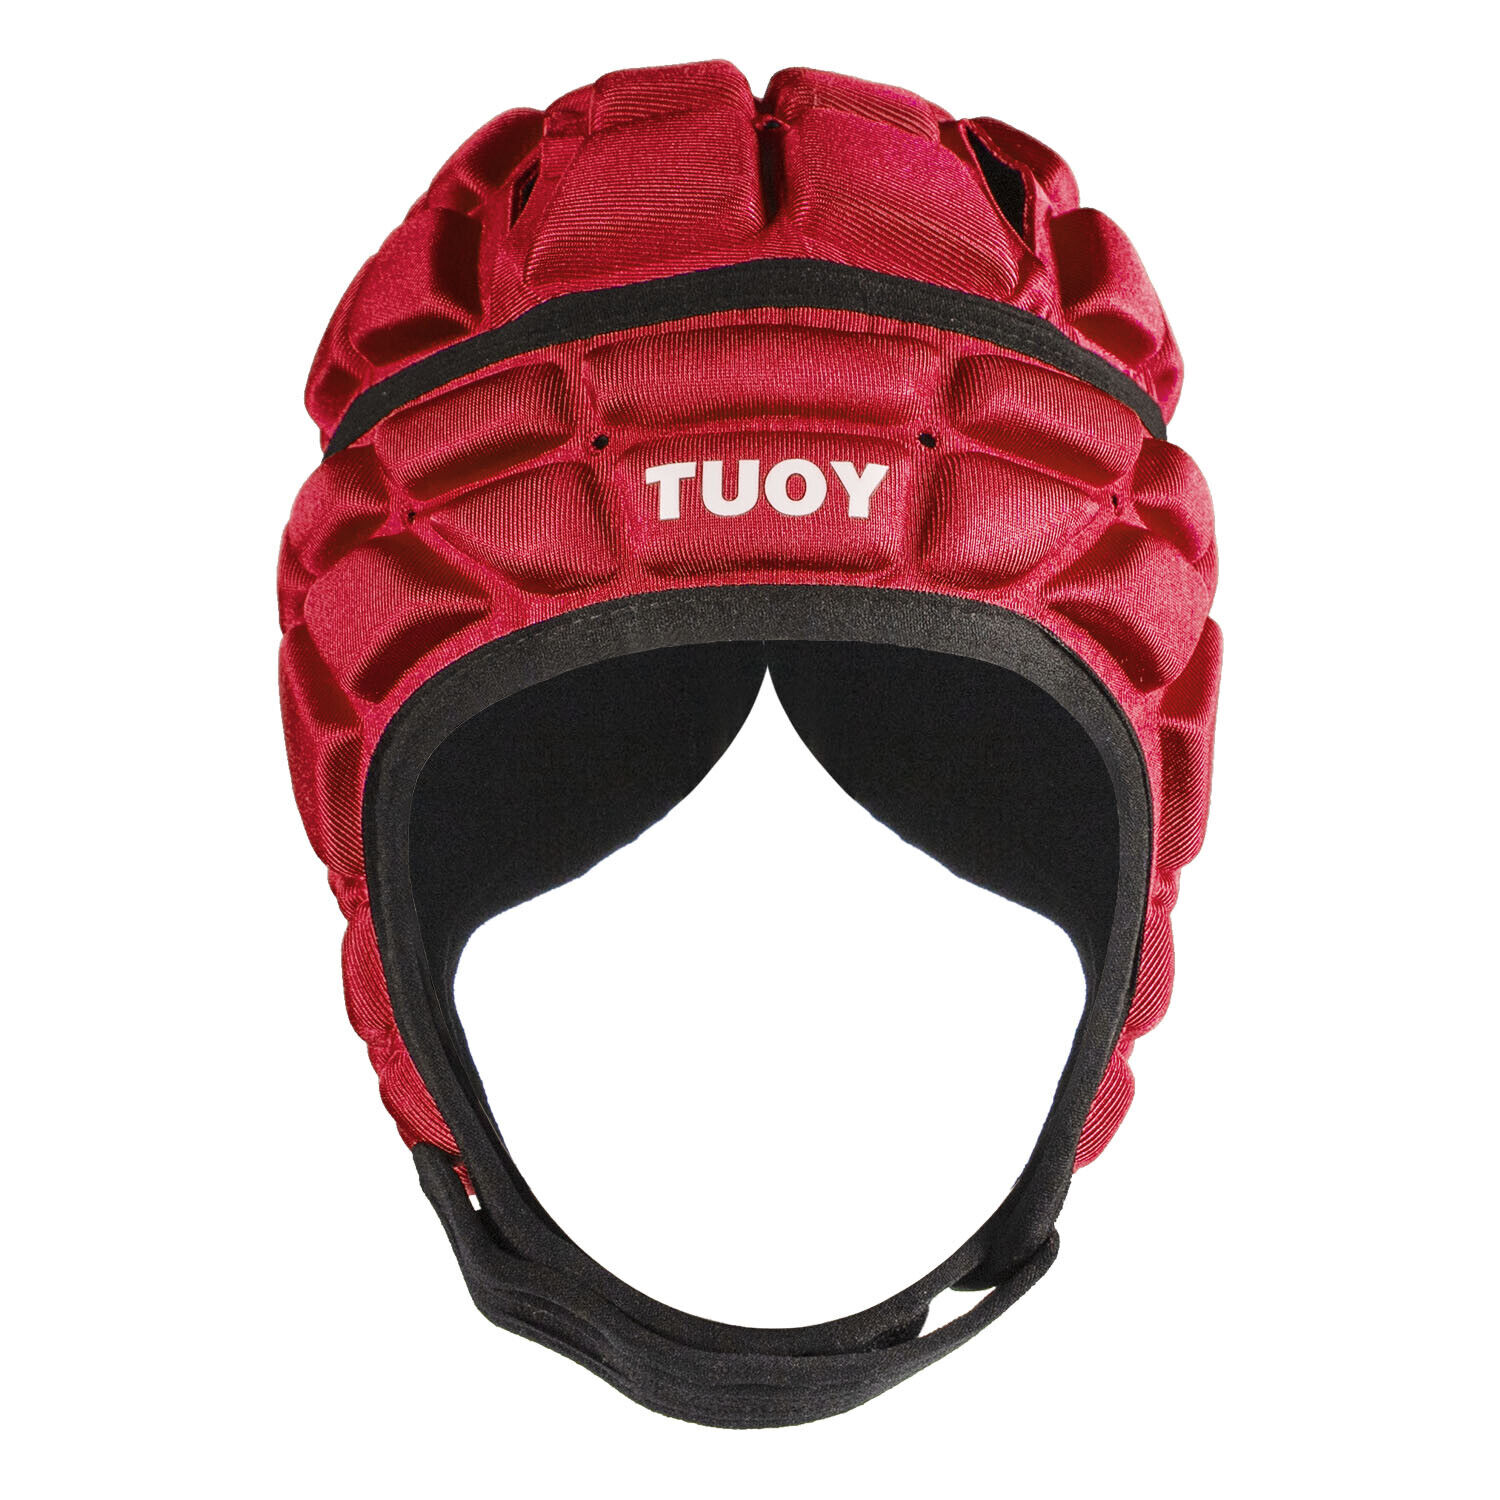 Scrum Cap Rugby Football Soccer Time sale Head Padded Tampa Mall Protector Headguard